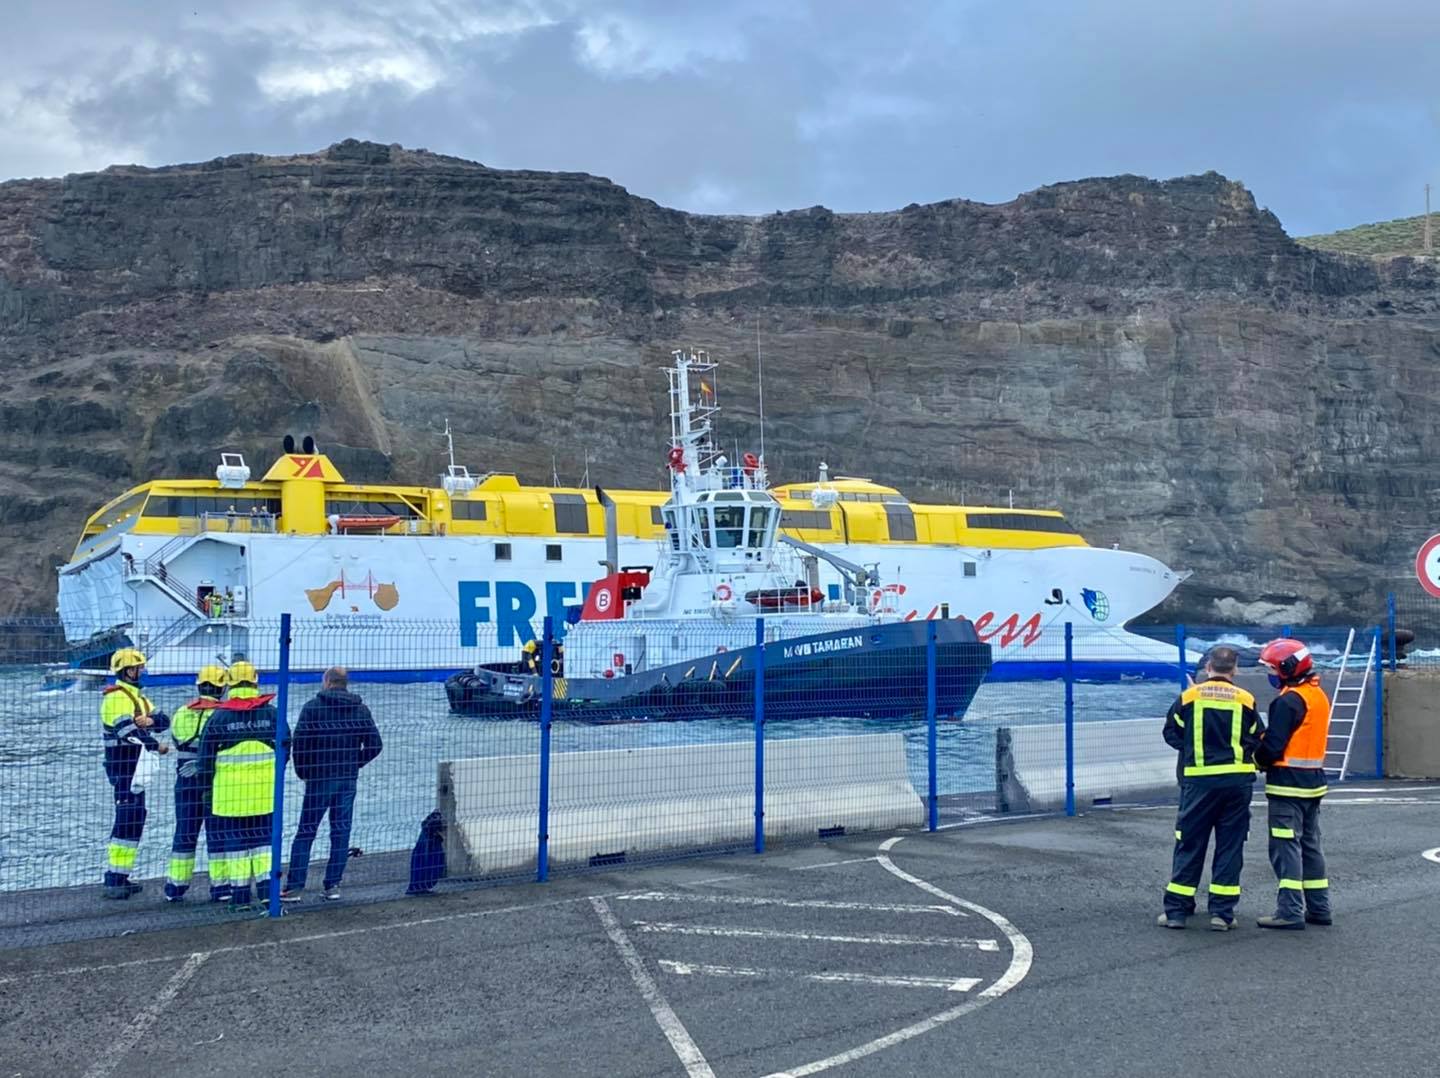 All crew and passengers safe after night aboard ferry that ran aground in the Gran Canaria port of Agaete